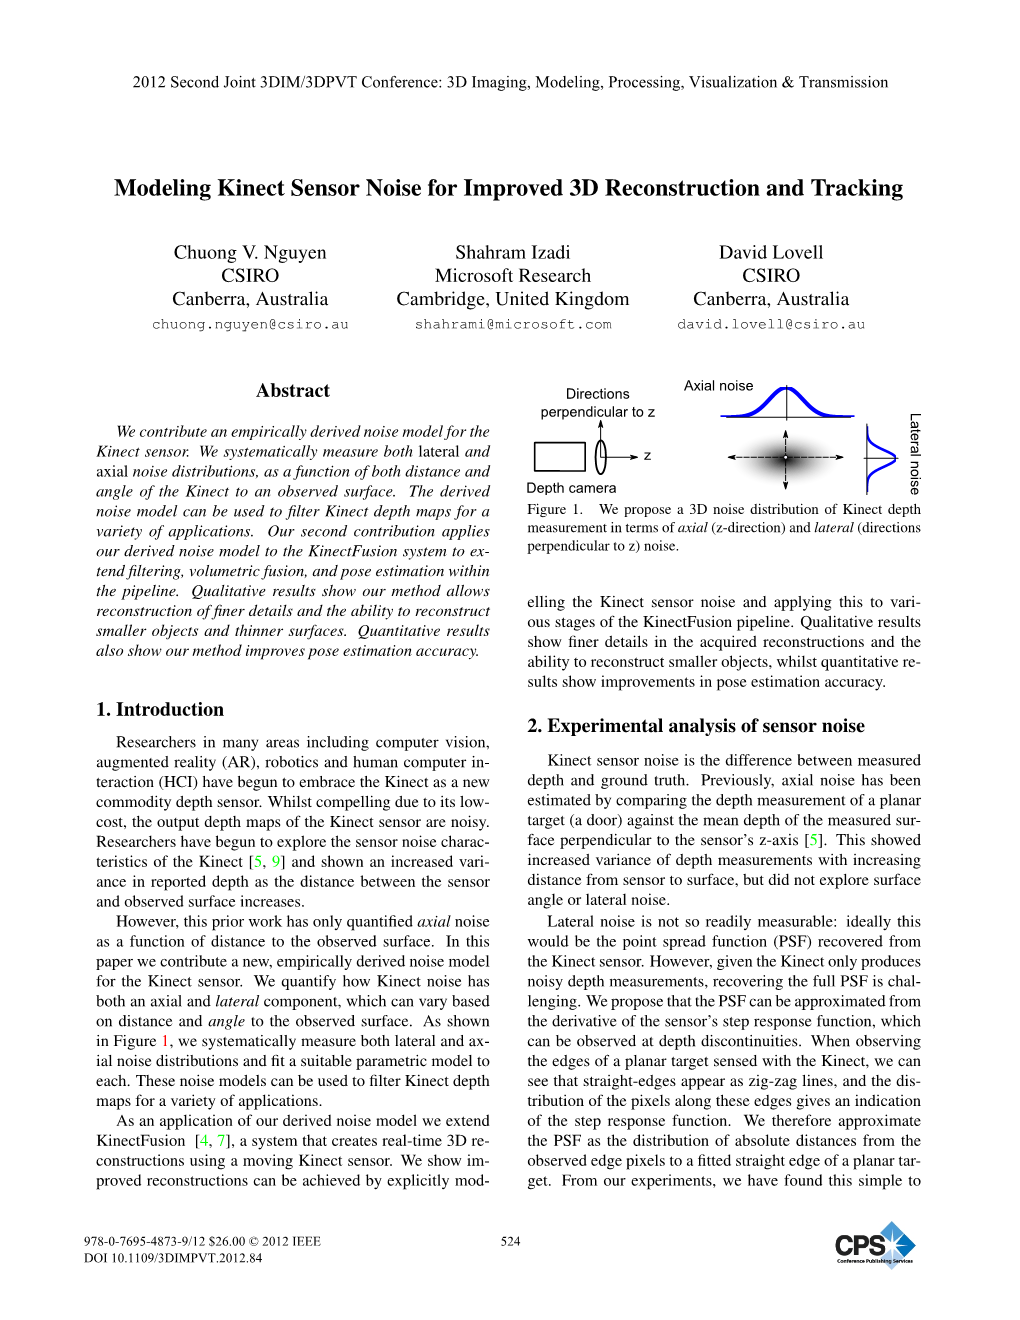 Modeling Kinect Sensor Noise for Improved 3D Reconstruction and Tracking